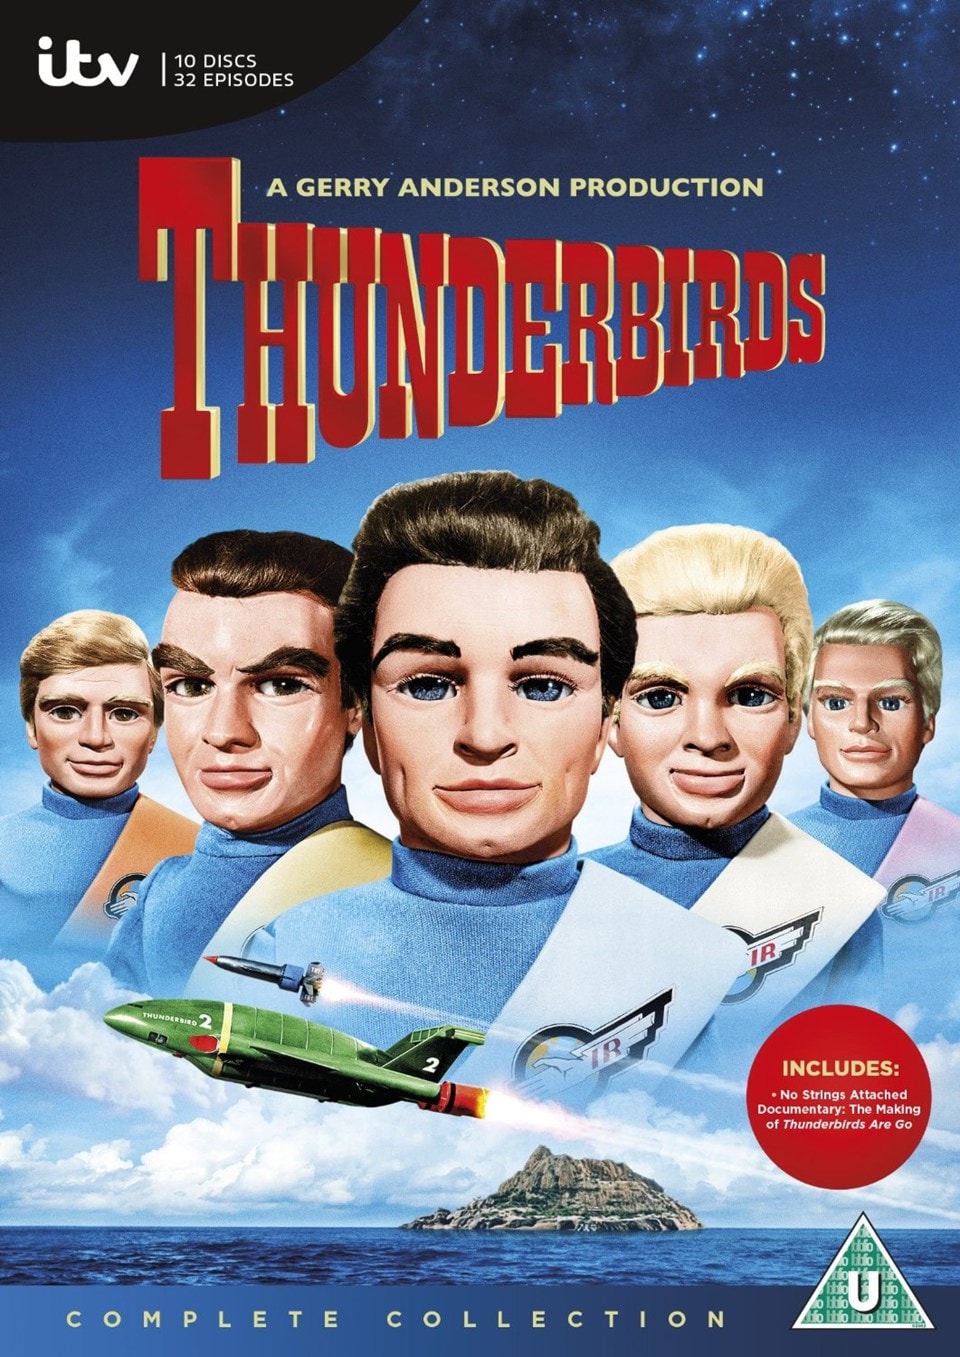 Thunderbirds The Complete Collection DVD Box Set Free shipping